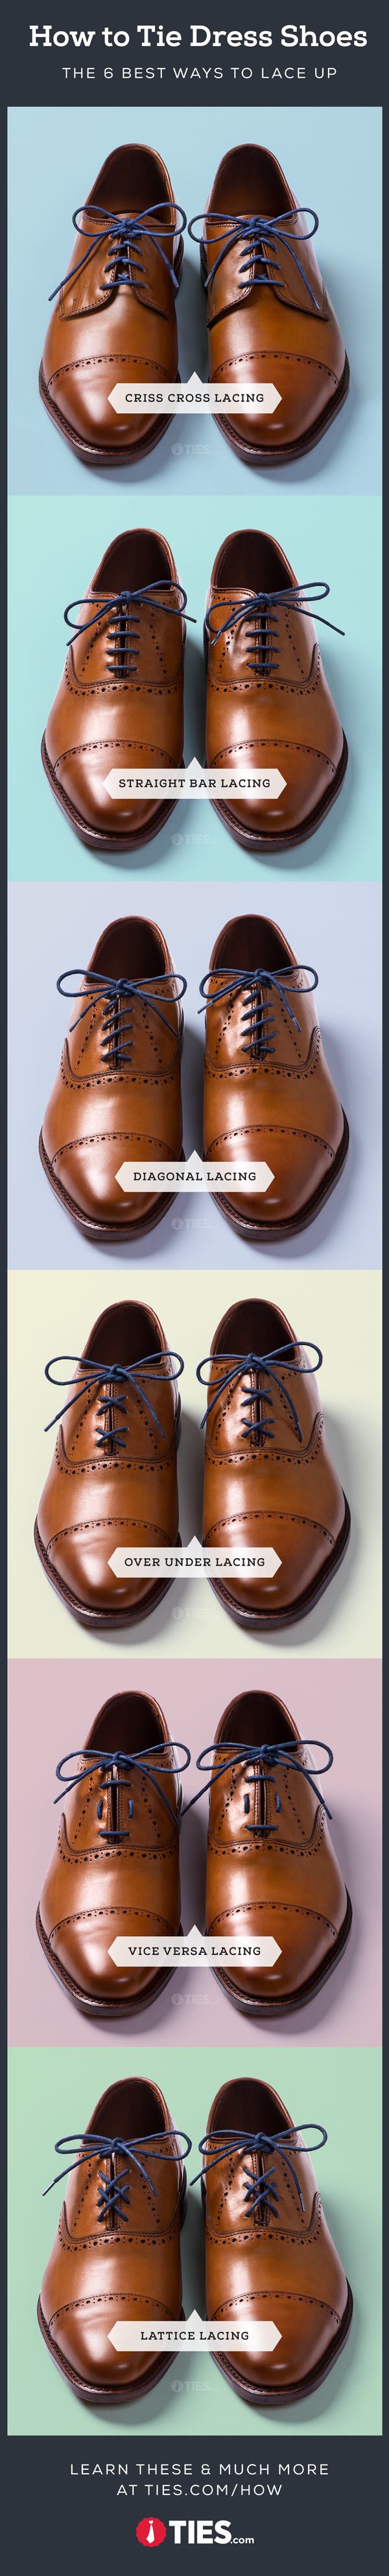 How To Tie Dress Shoes | How To Lace 